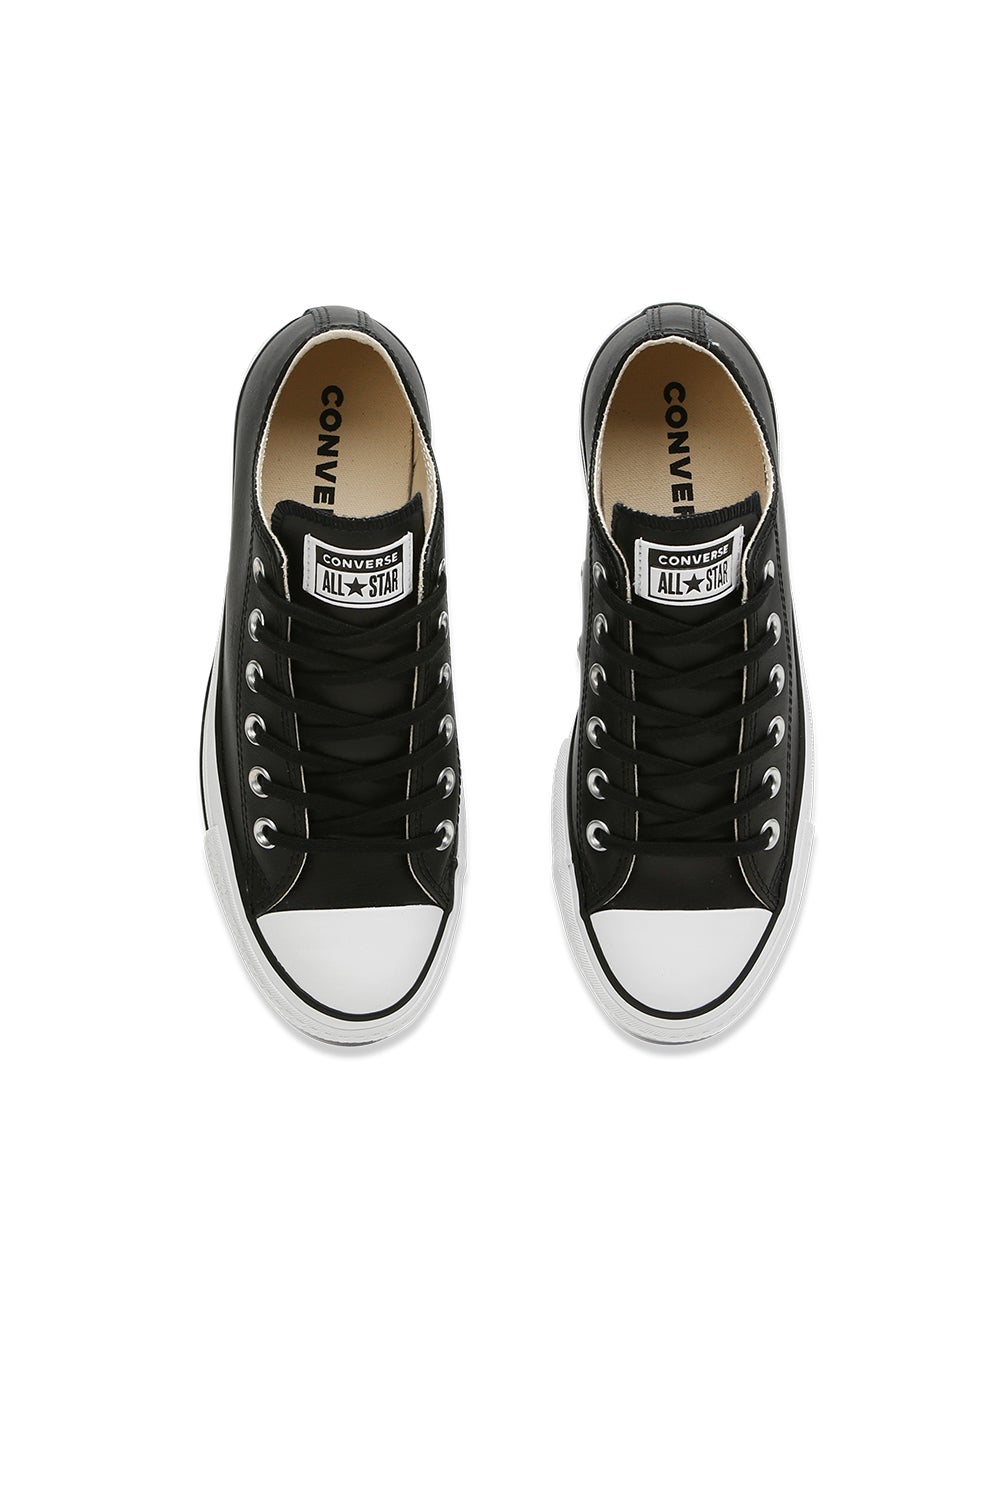 Converse Chuck Taylor All Star Lift Clean Leather Low Top Black ... عطر نوف من الماجد